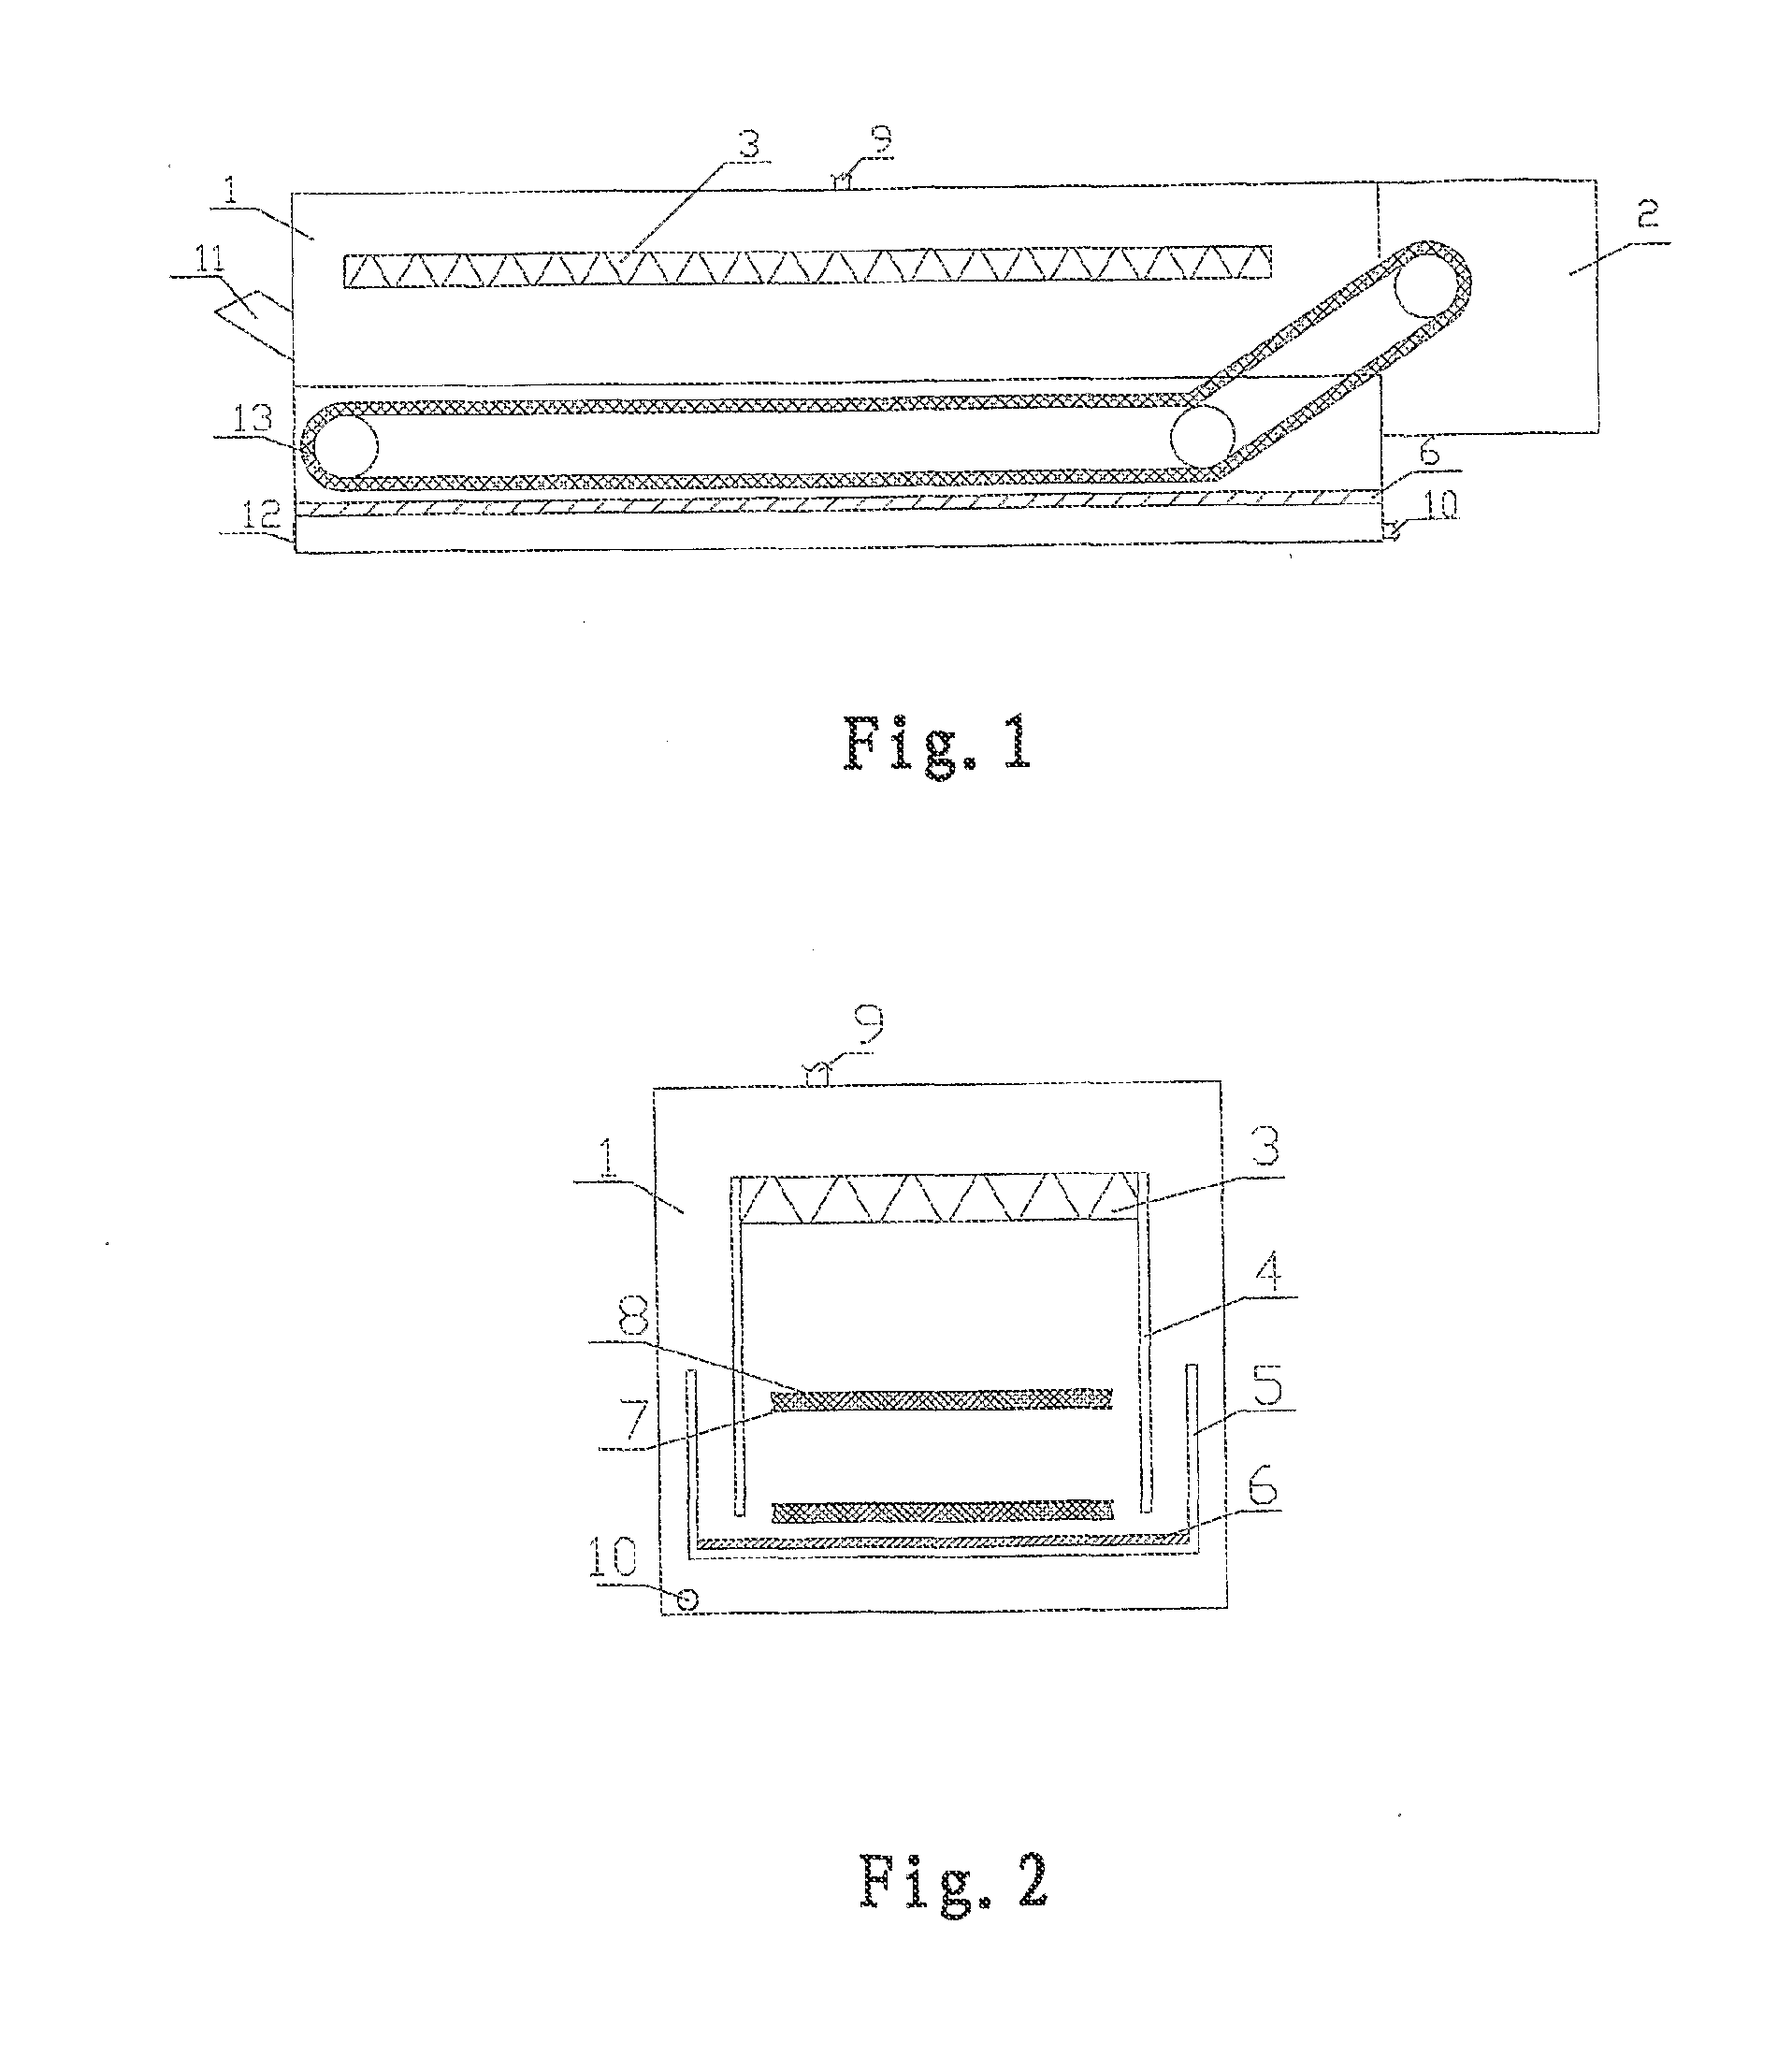 System and Method for Continuous Extraction of Material